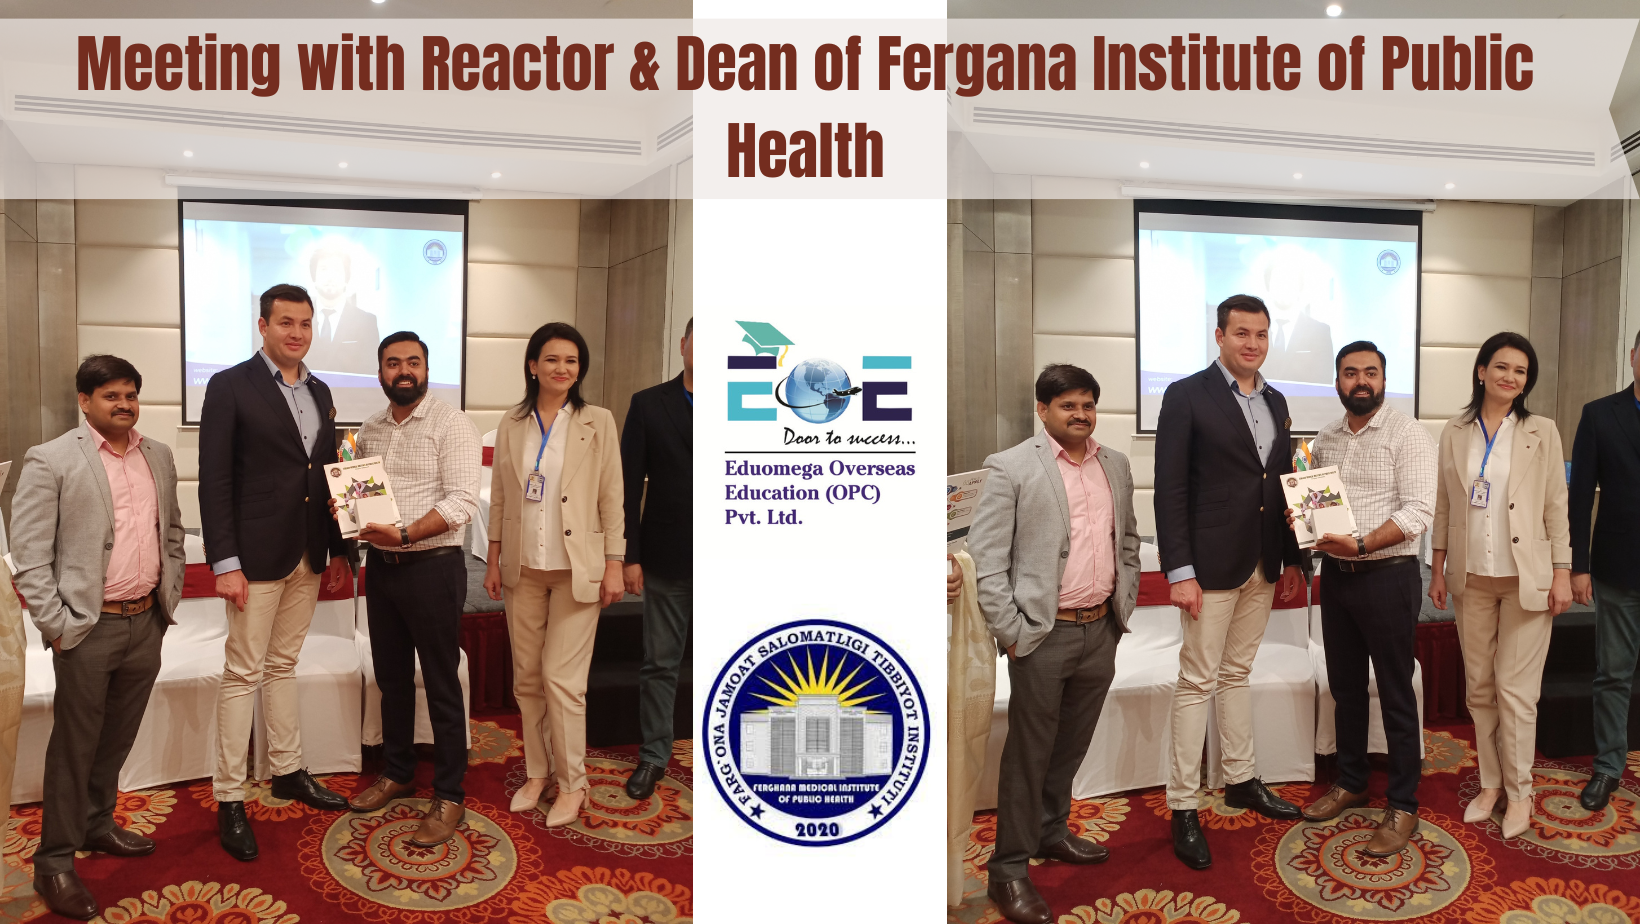 Meeting with Reactor & Dean of Fergana Institute of Public Health